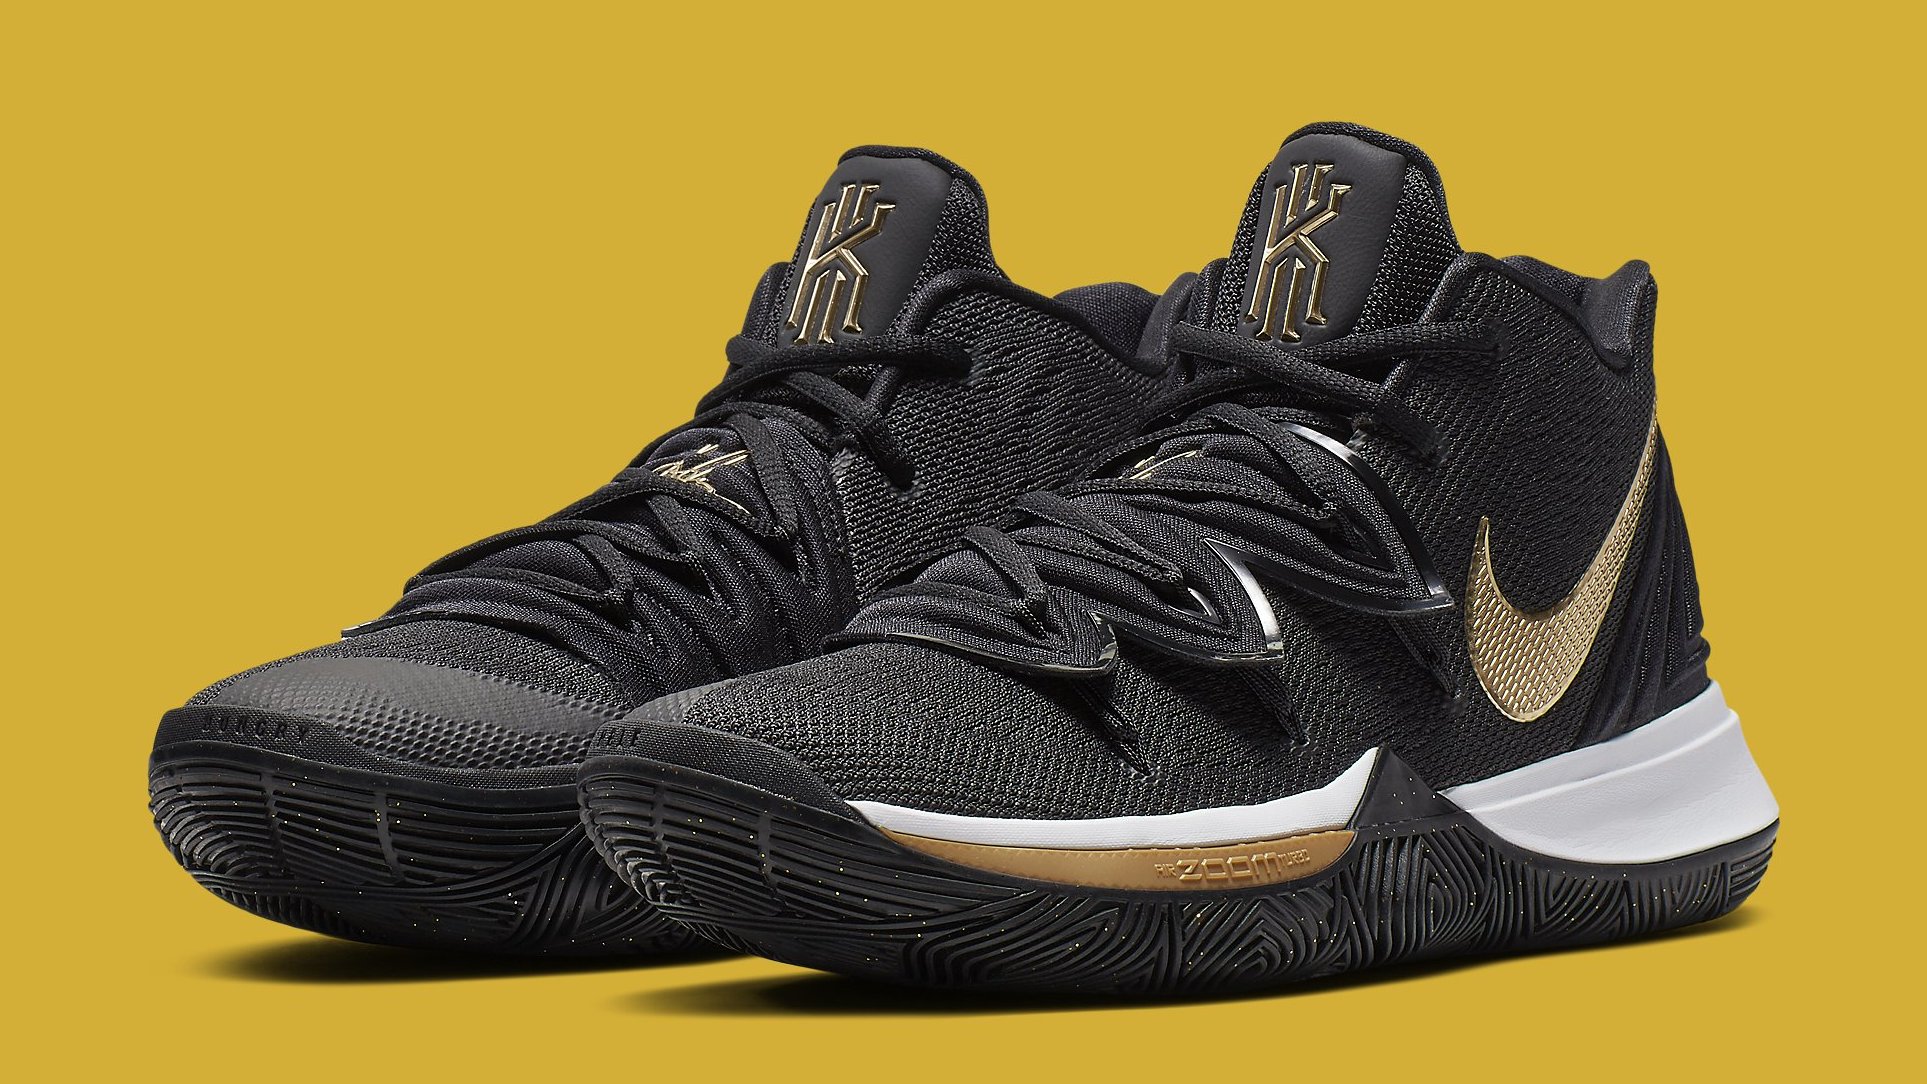 kyrie irving shoes 2 black and gold